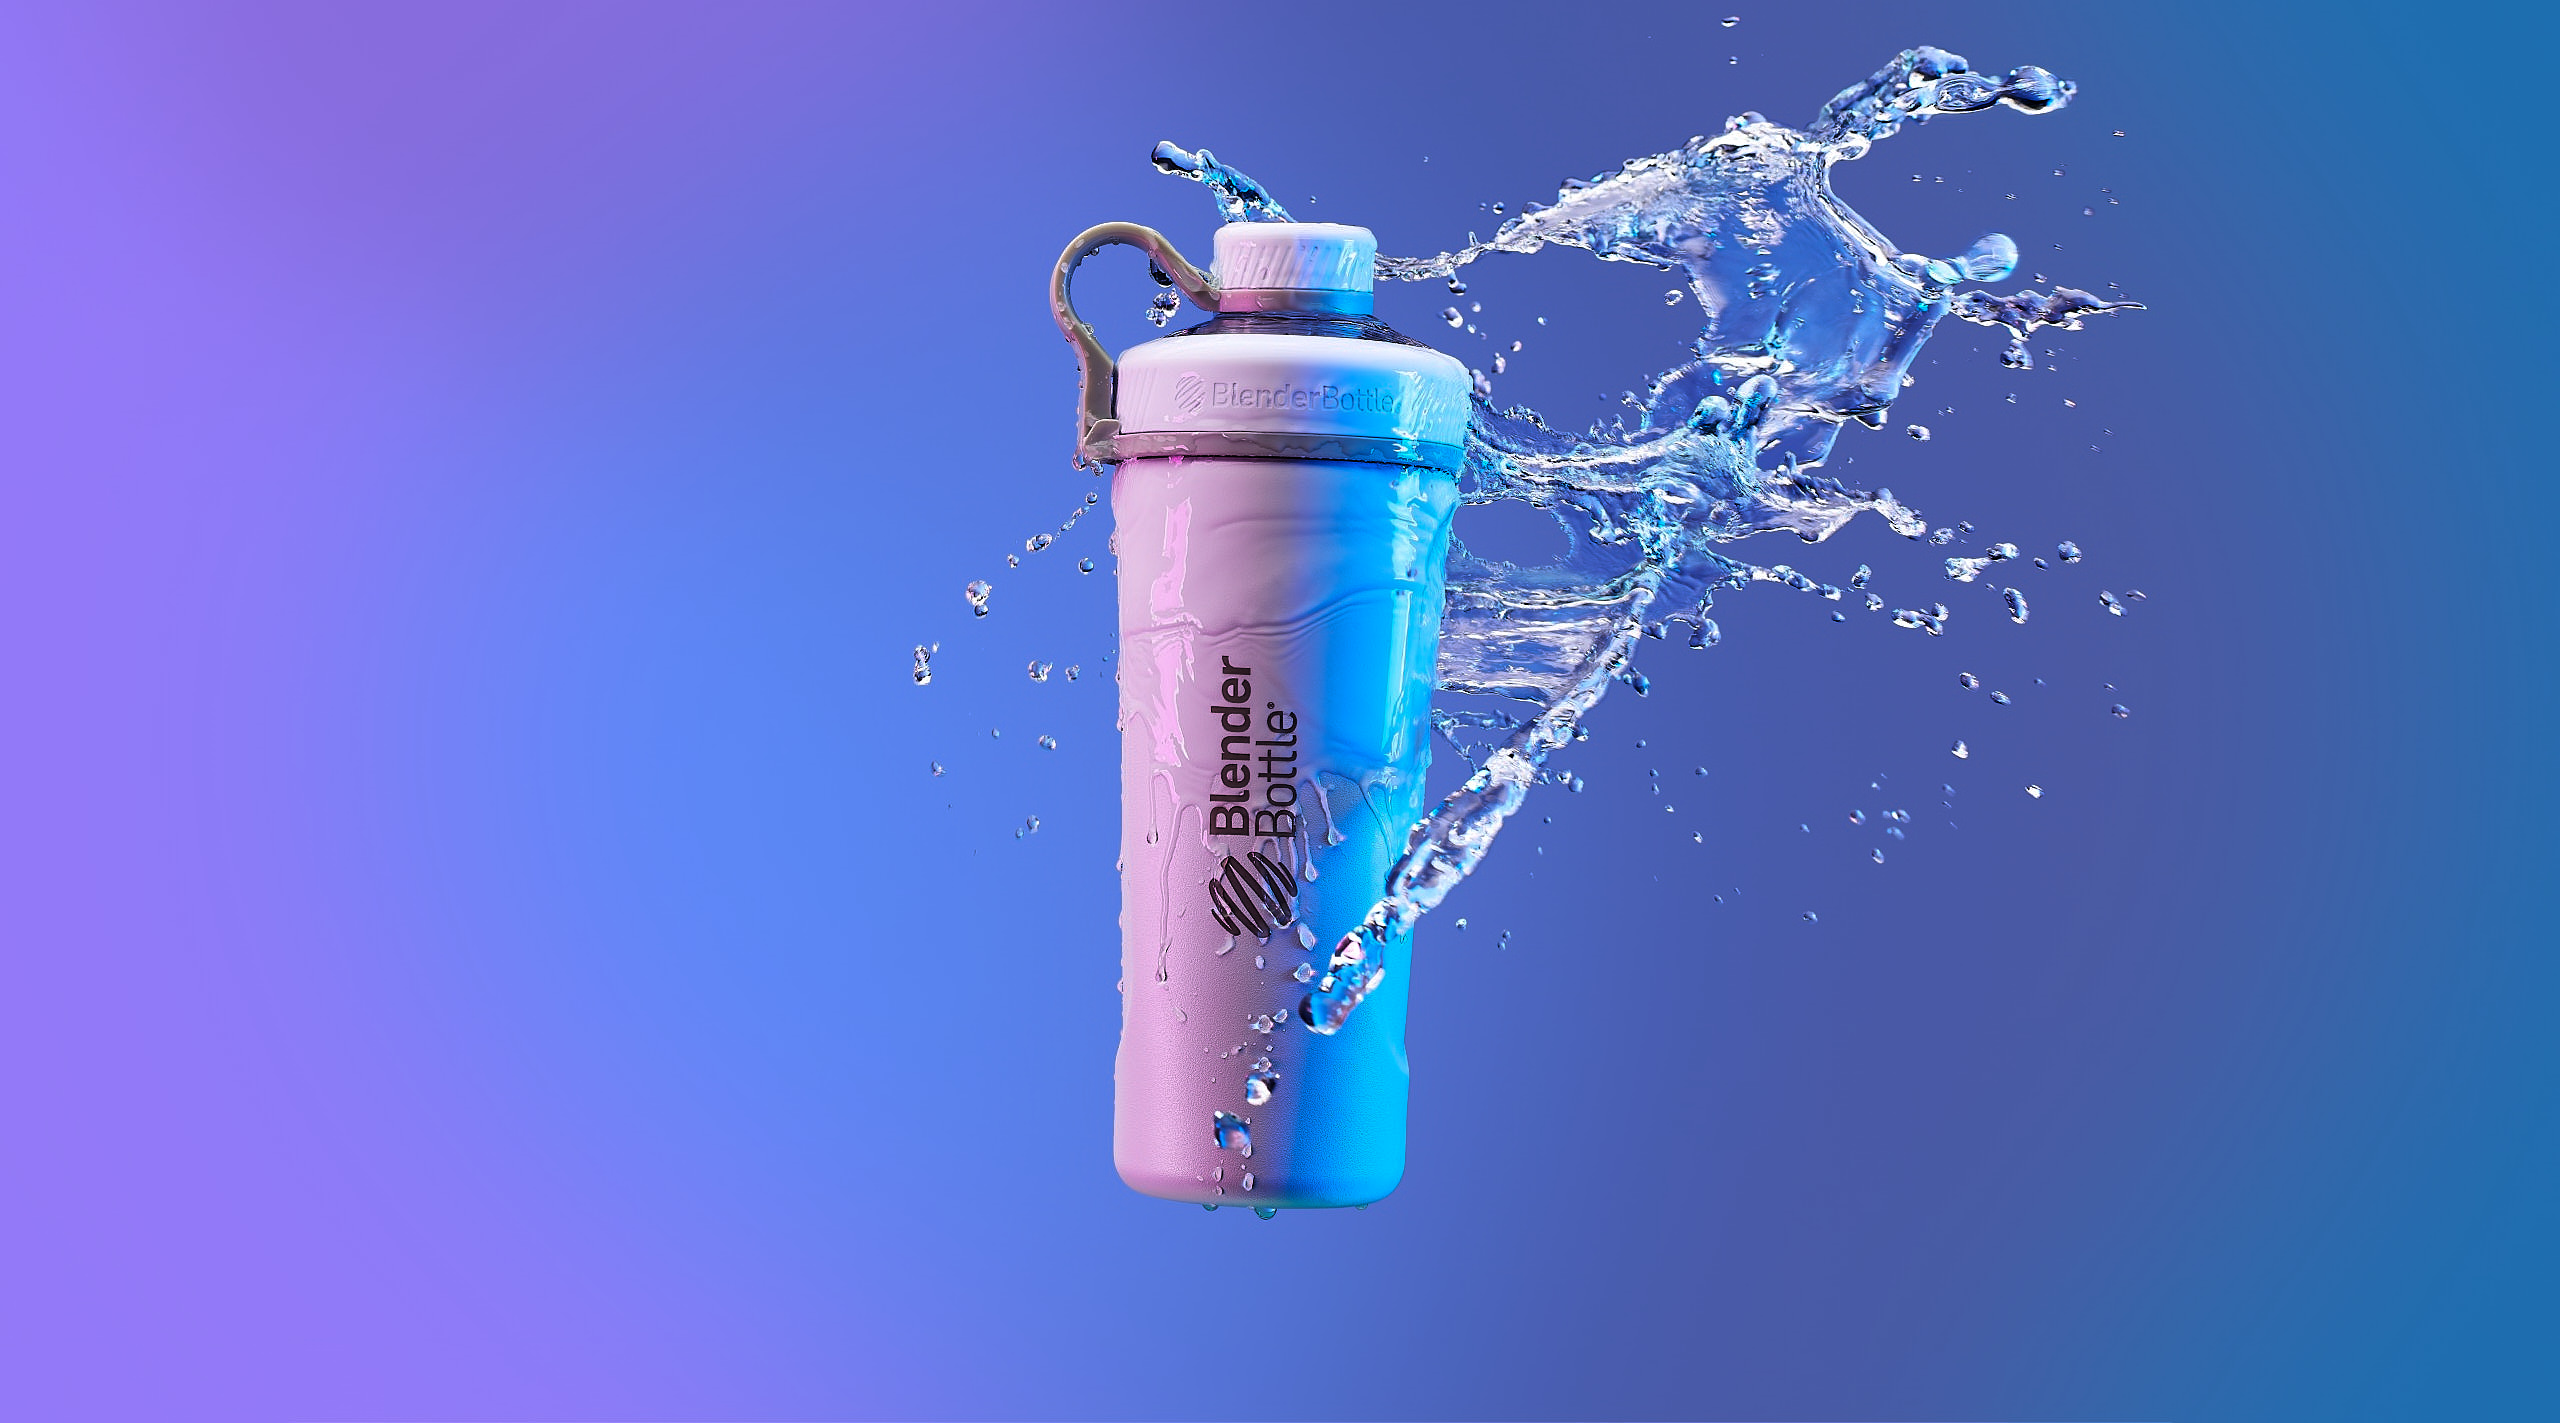 WHITE SPORTS BOTTLE FLYING IN AIR GETTING HIT WITH A SPLASH OF WATER WITH GEL LIGHTS ON IT